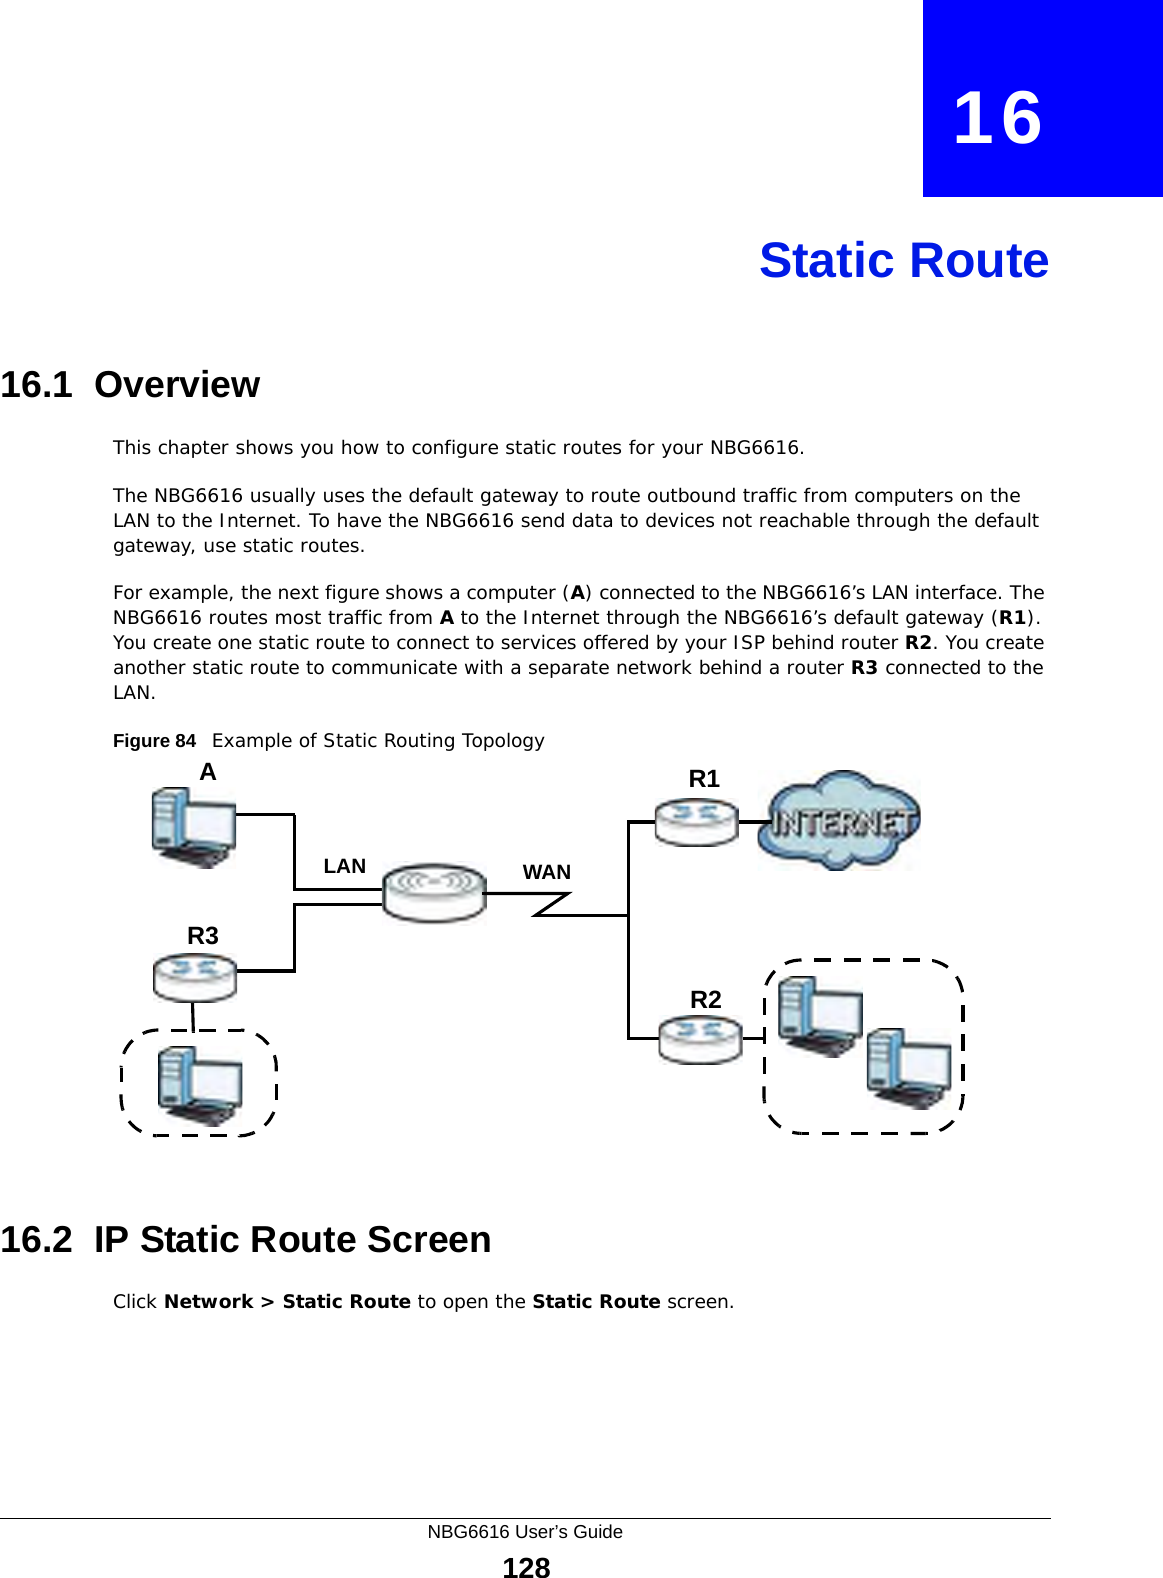 NBG6616 User’s Guide128CHAPTER   16Static Route16.1  Overview   This chapter shows you how to configure static routes for your NBG6616.The NBG6616 usually uses the default gateway to route outbound traffic from computers on the LAN to the Internet. To have the NBG6616 send data to devices not reachable through the default gateway, use static routes.For example, the next figure shows a computer (A) connected to the NBG6616’s LAN interface. The NBG6616 routes most traffic from A to the Internet through the NBG6616’s default gateway (R1). You create one static route to connect to services offered by your ISP behind router R2. You create another static route to communicate with a separate network behind a router R3 connected to the LAN.Figure 84   Example of Static Routing Topology16.2  IP Static Route Screen Click Network &gt; Static Route to open the Static Route screen. WANR1R2AR3LAN